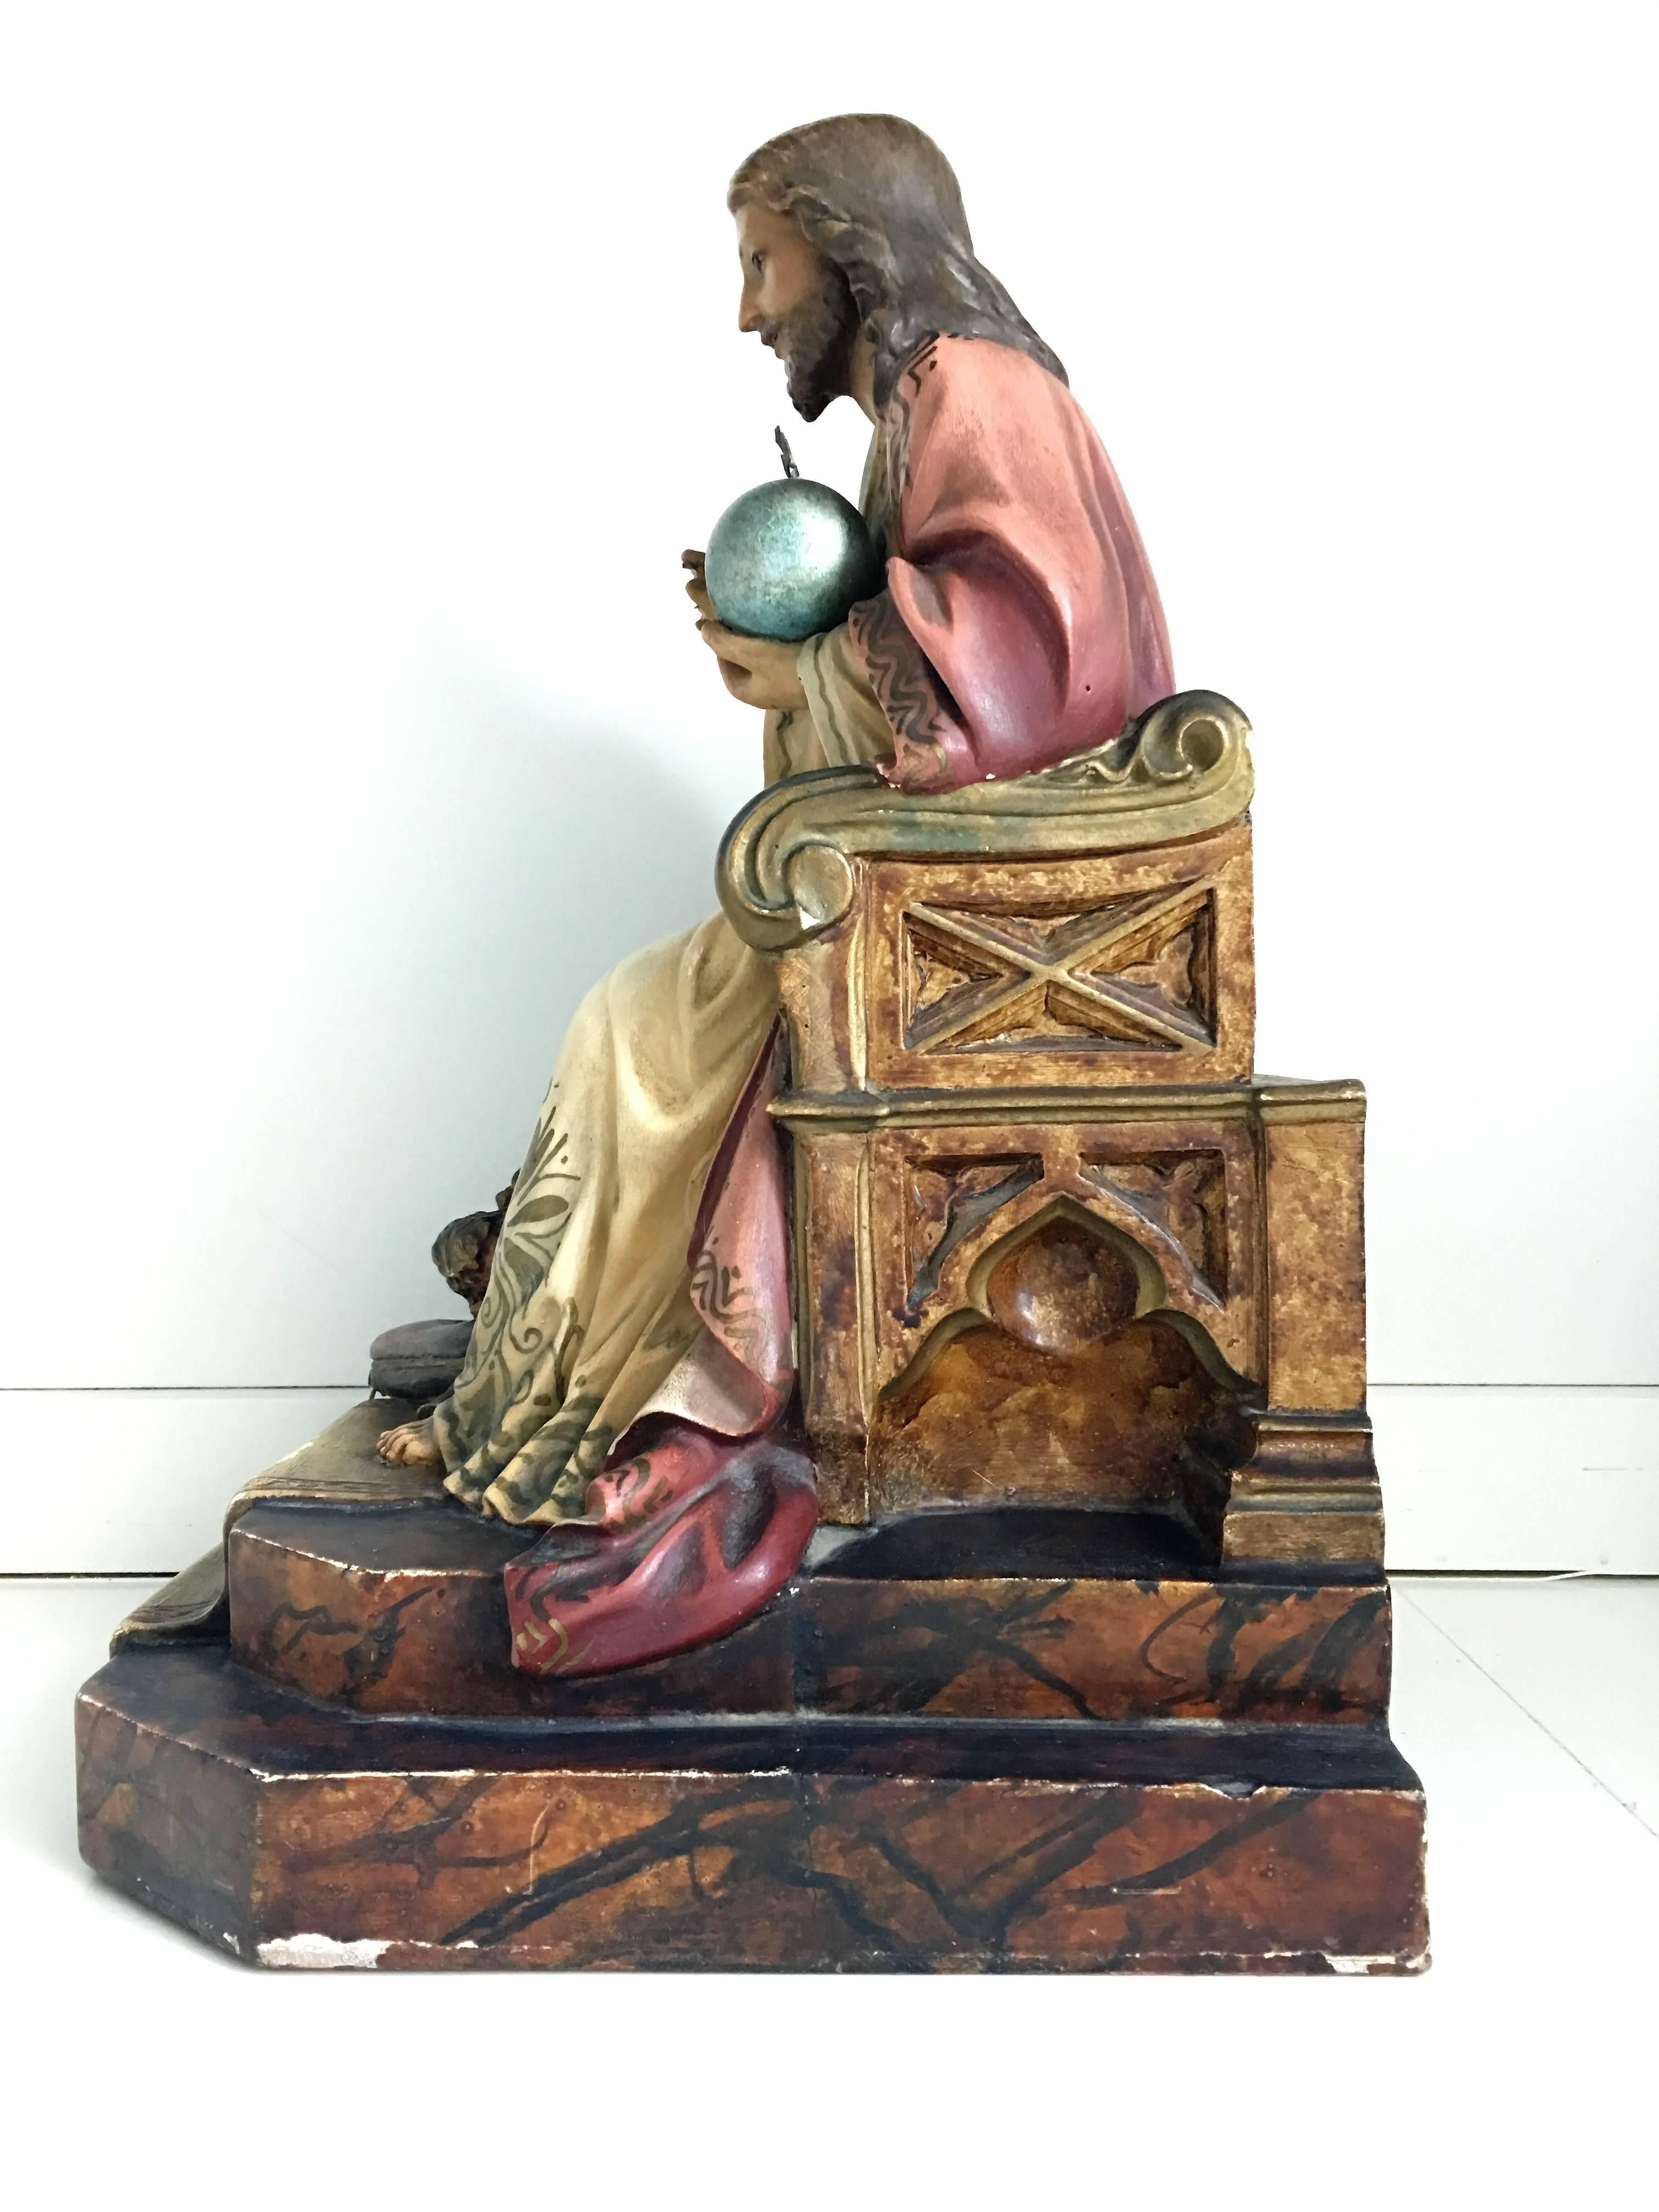 This beautiful statue of Christ was crafted in Spain, circa 1900. The statue features the religious figure standing in a traditional seating pose and showing his Sacred Heart. The sculpture has its original painted finish. The sculpture has a soft,